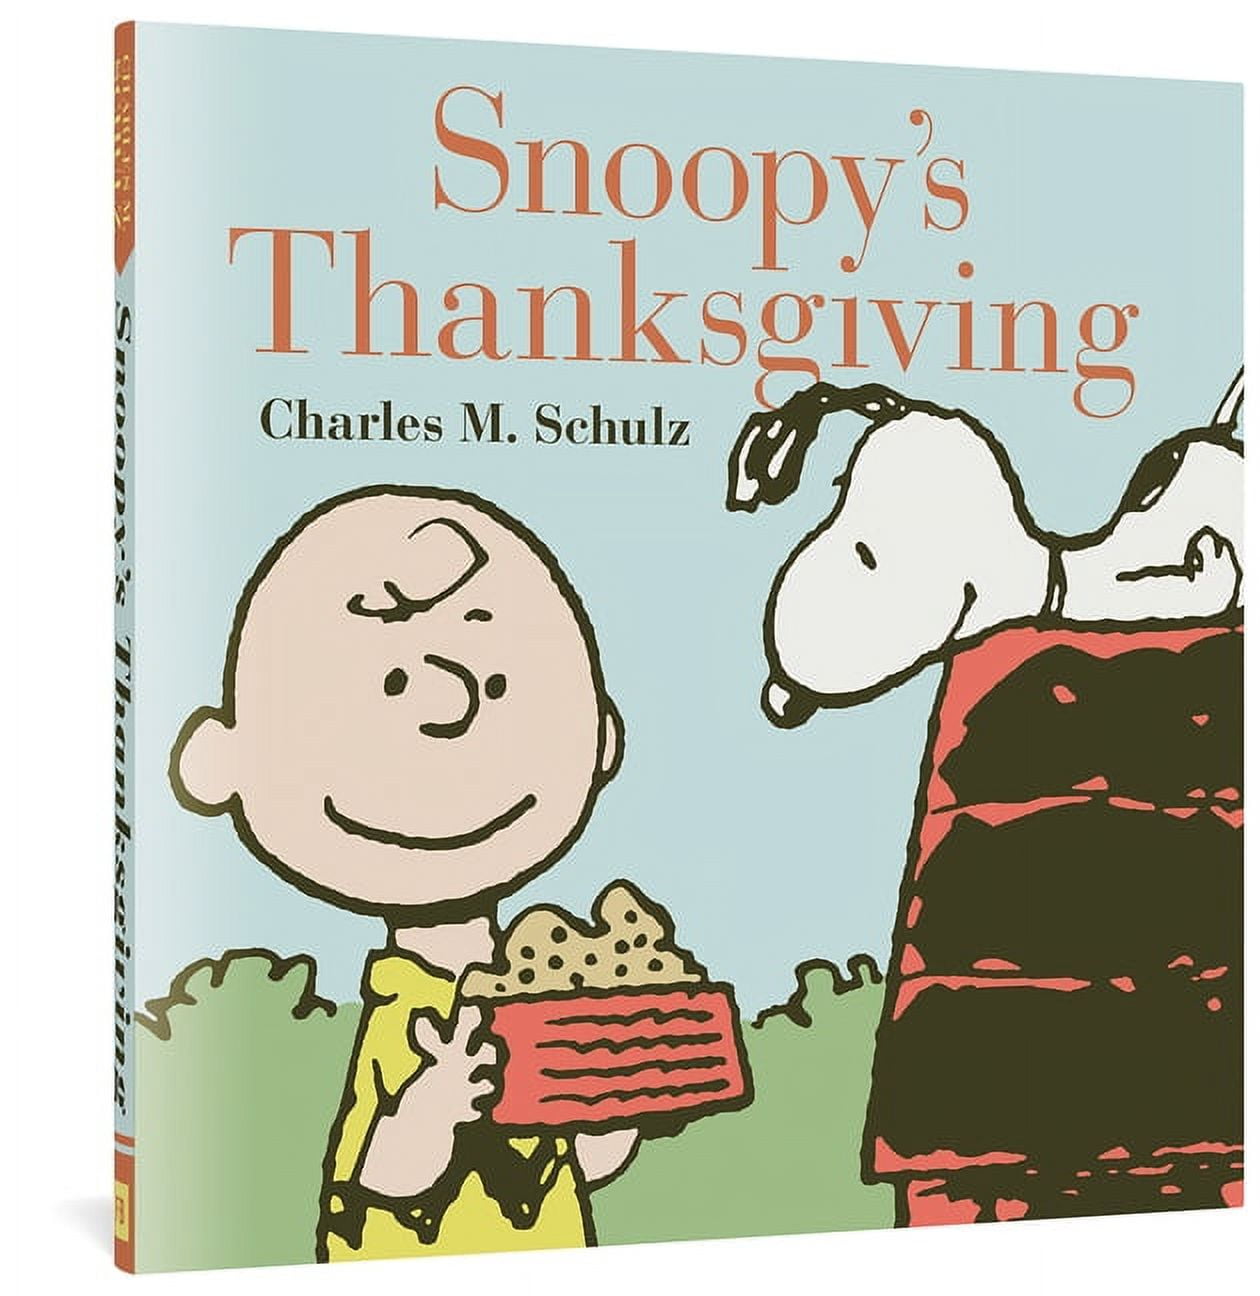 Snoopy's Thanksgiving [Book]